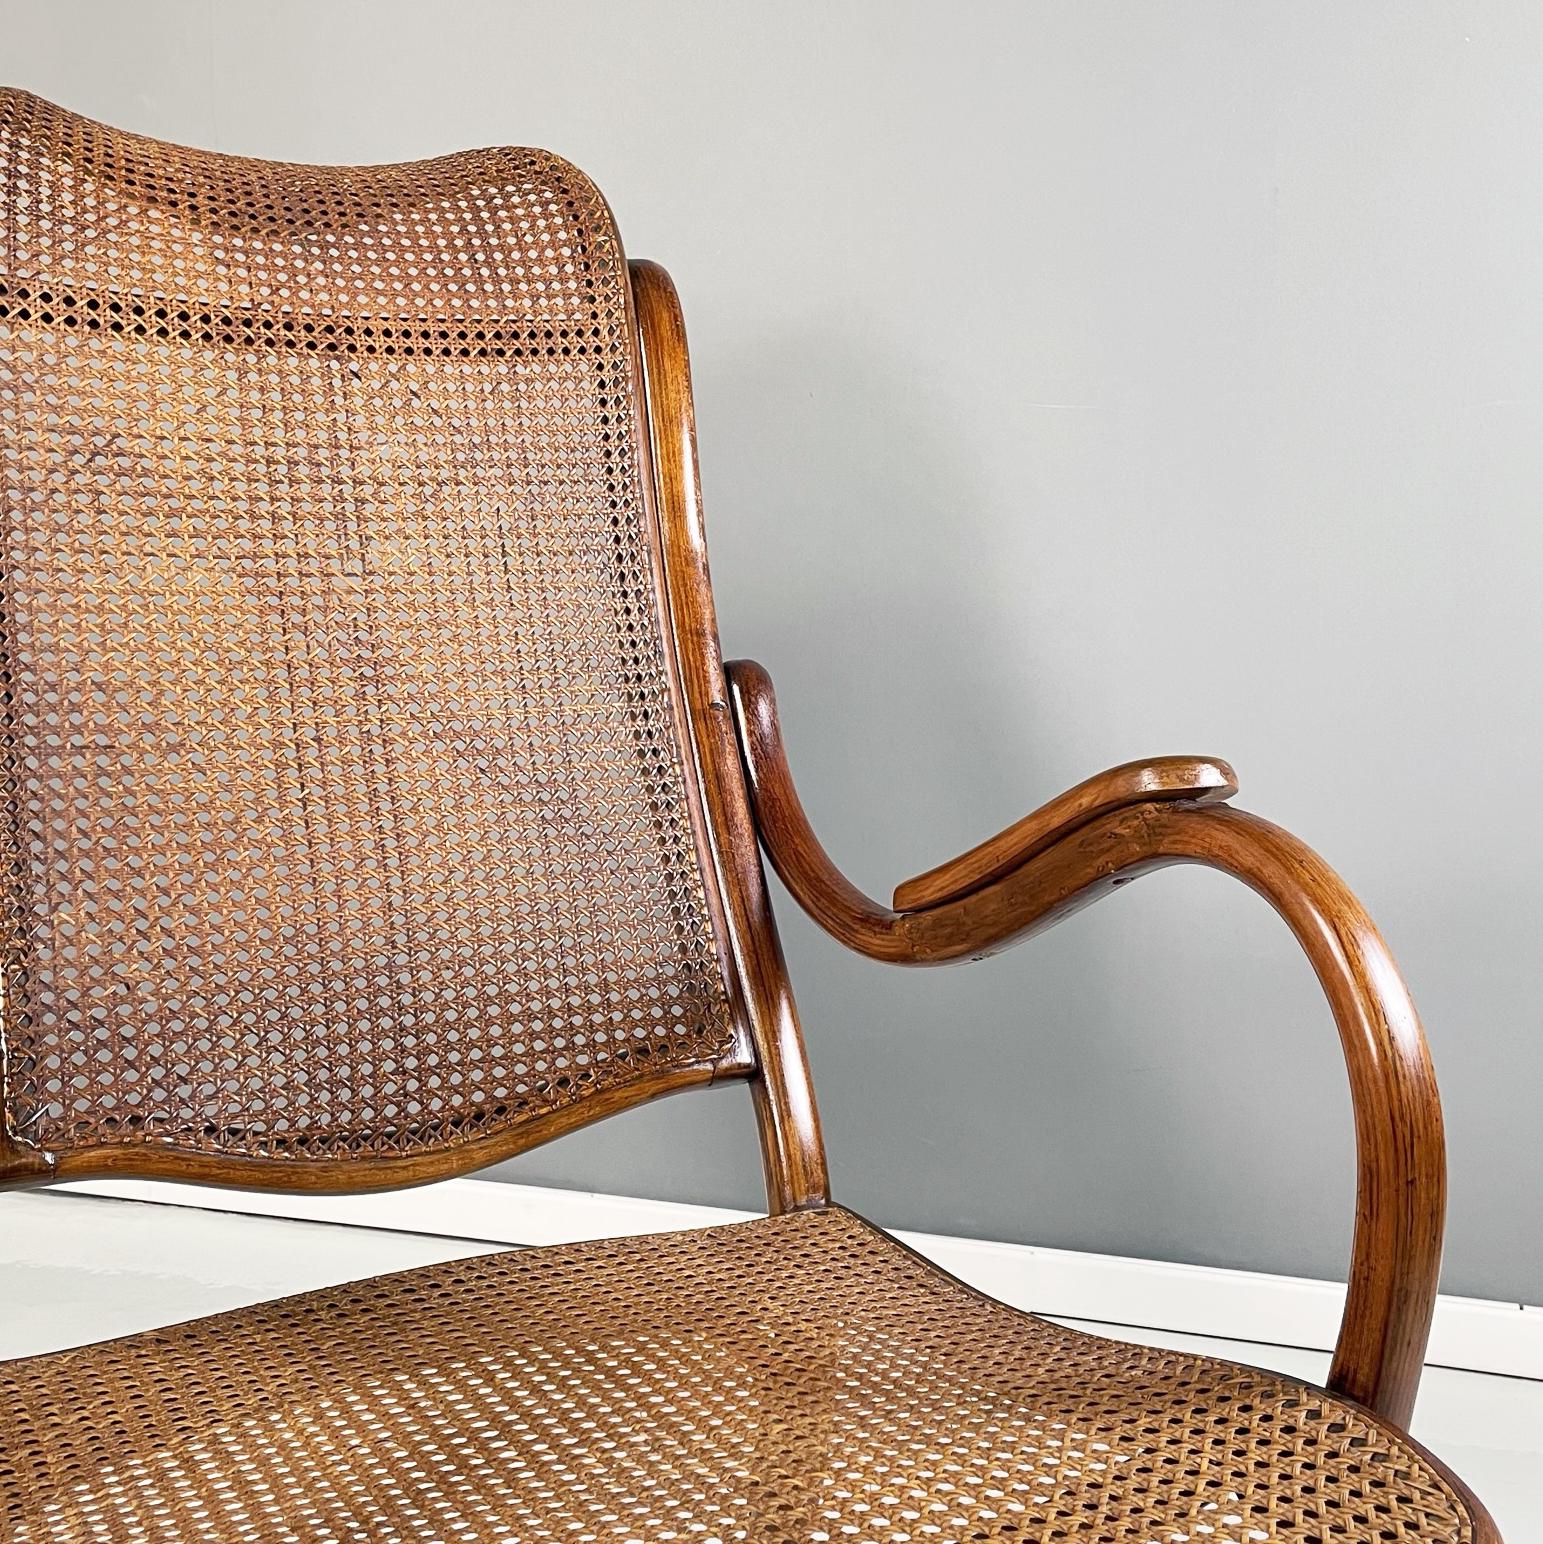 Austrian Armchair with Dark Brown Straw and Solid Wood in Thonet Style, 1900s For Sale 2